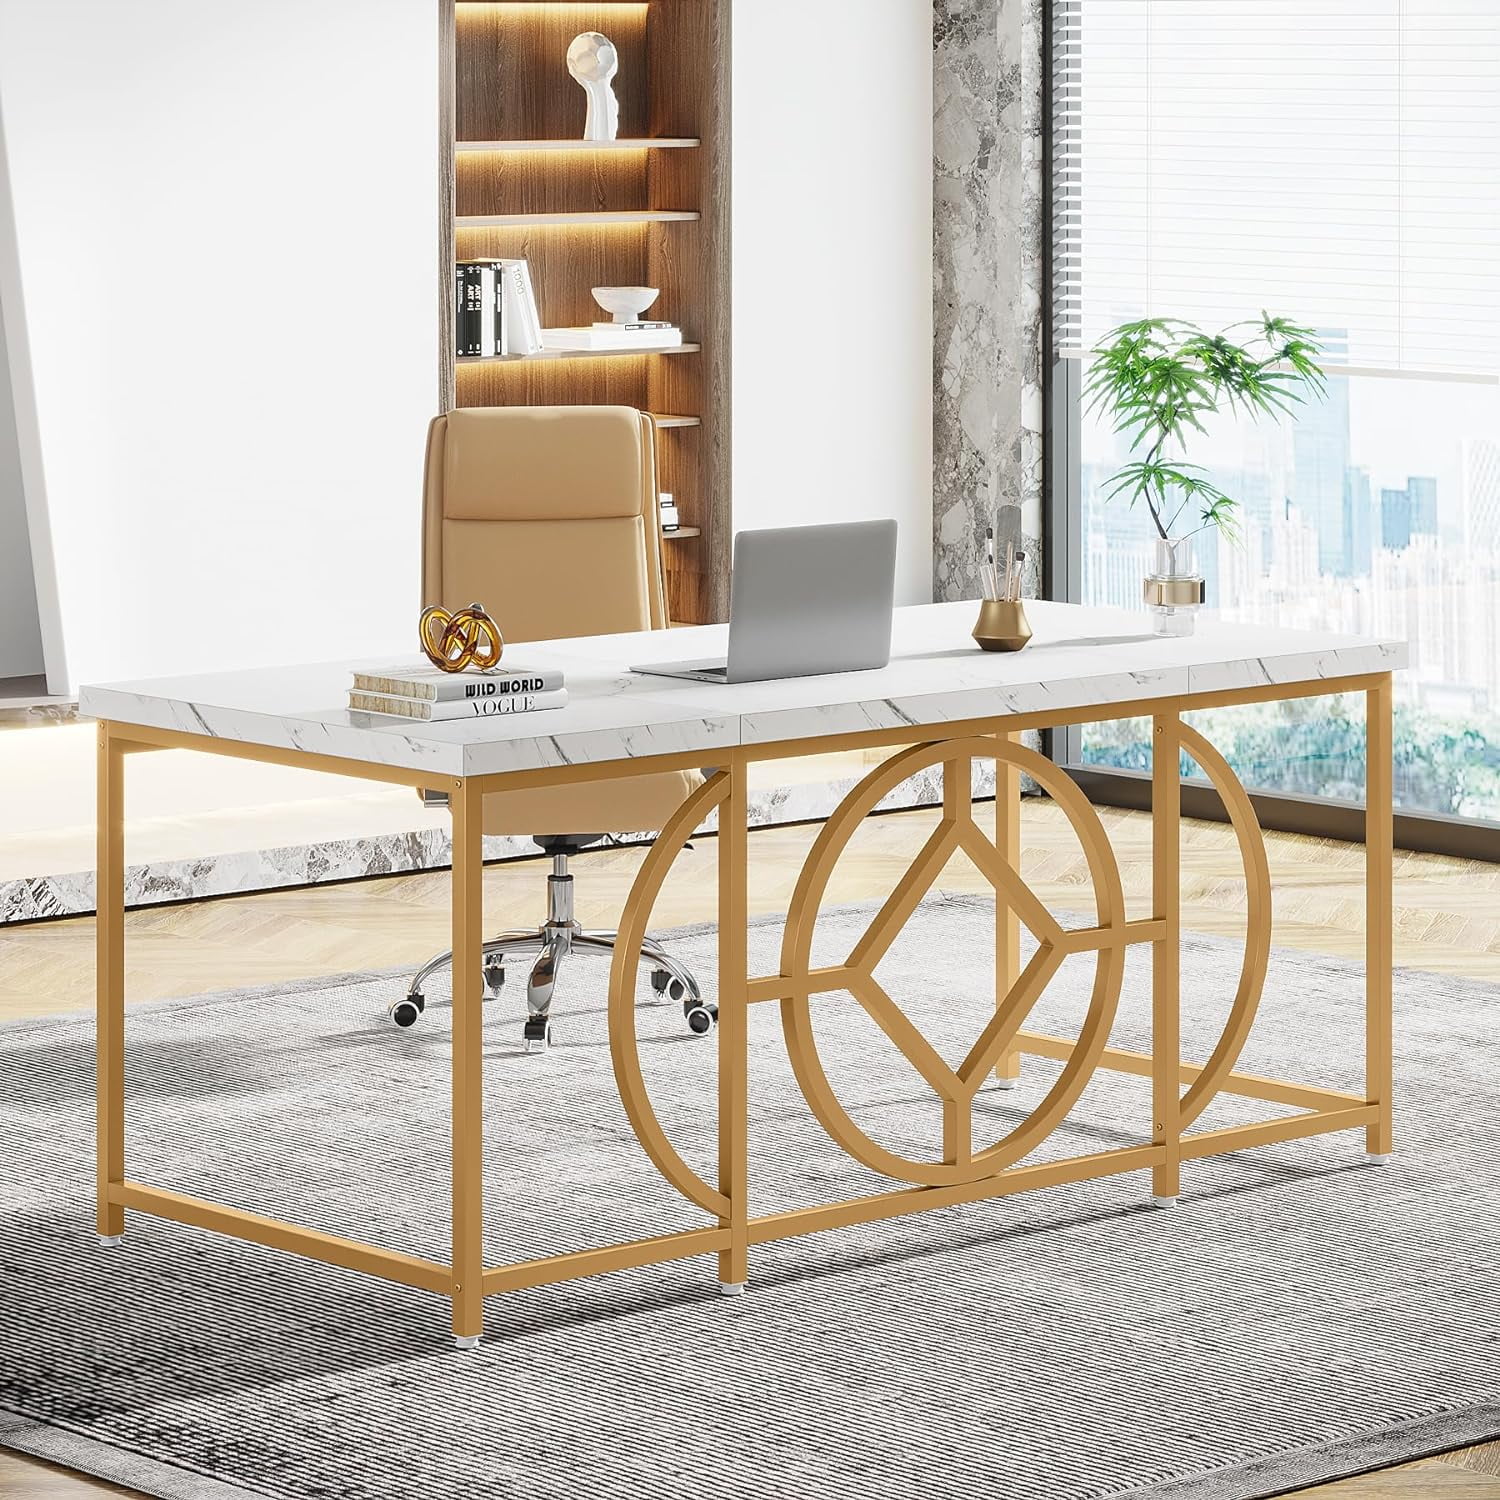 Tribesigns 63" Executive Desk, Modern Home Office Desk Computer Desk, White and Gold -Brand New